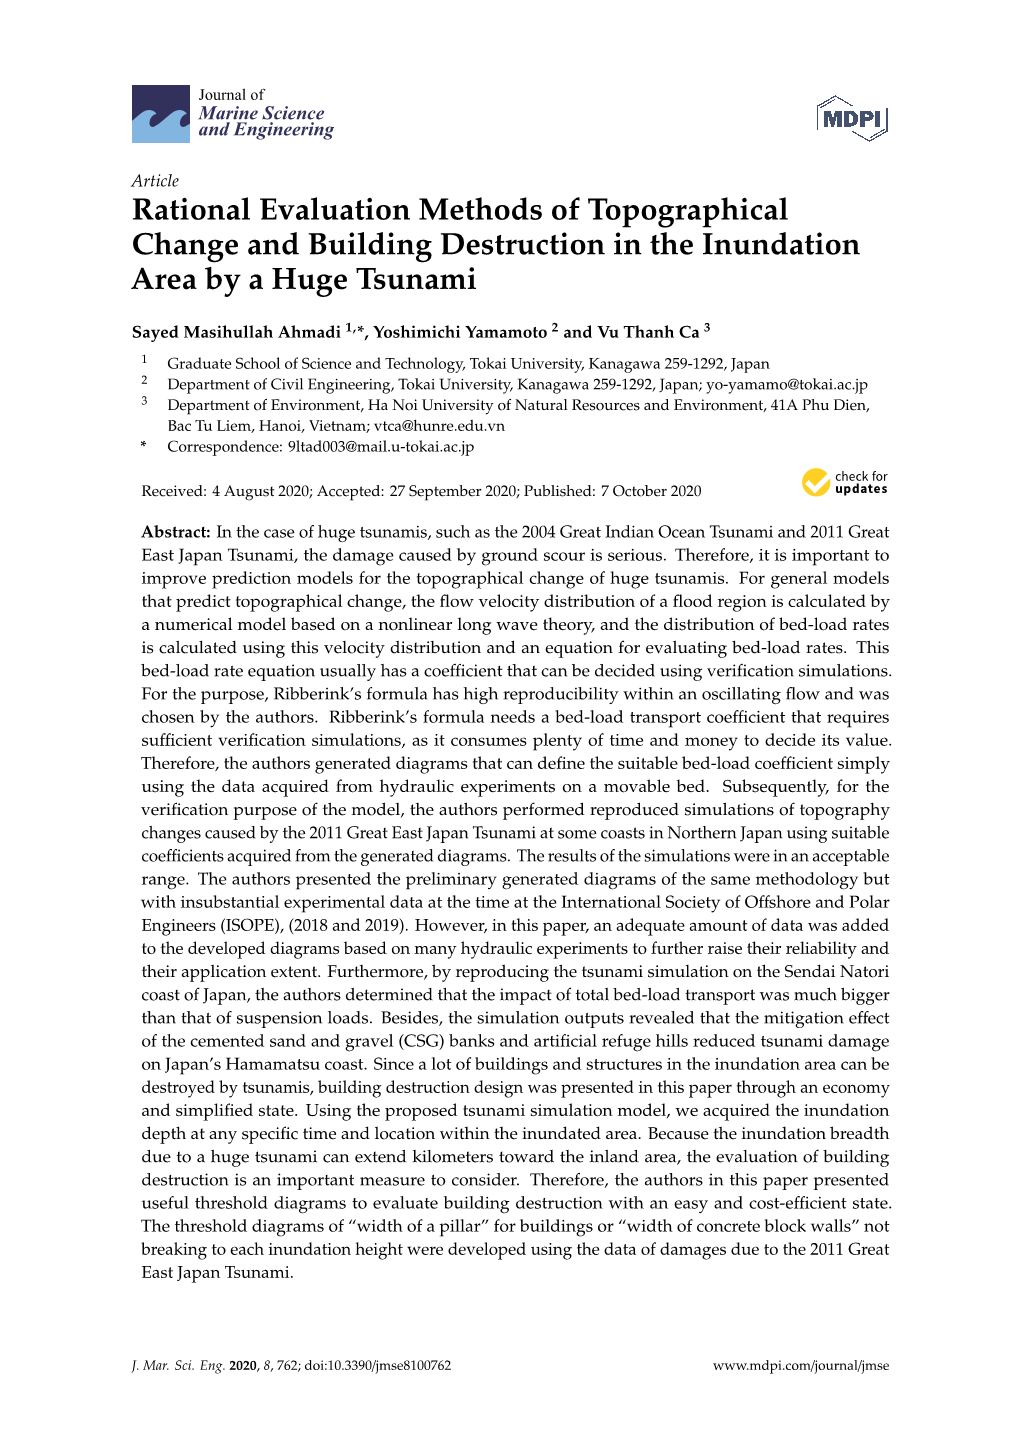 Rational Evaluation Methods of Topographical Change and Building Destruction in the Inundation Area by a Huge Tsunami